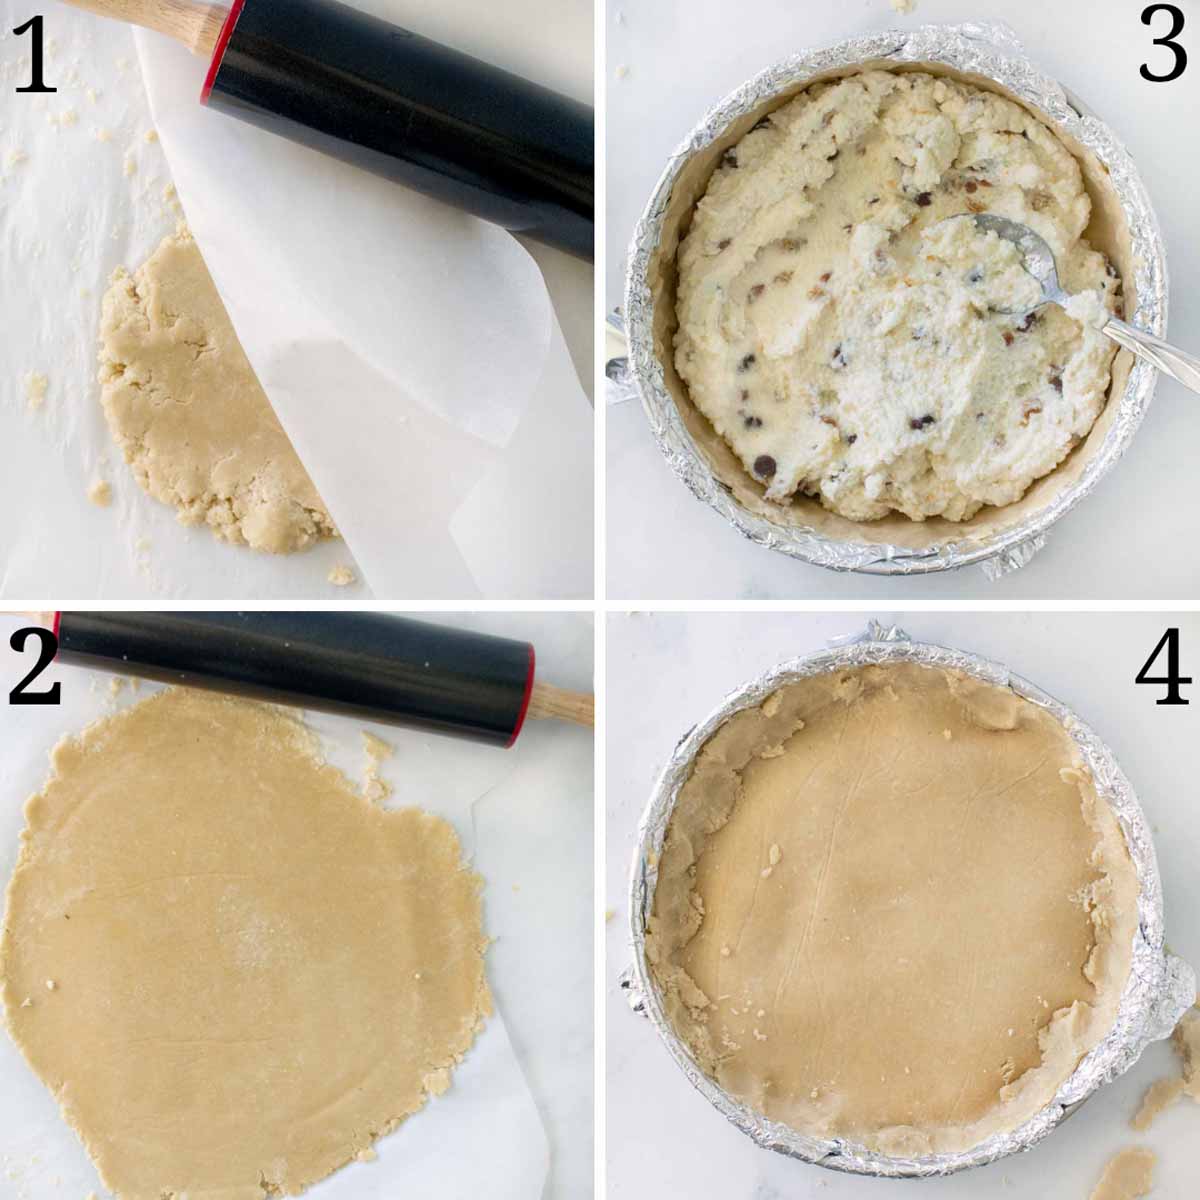 four images showing how to finish making the torta